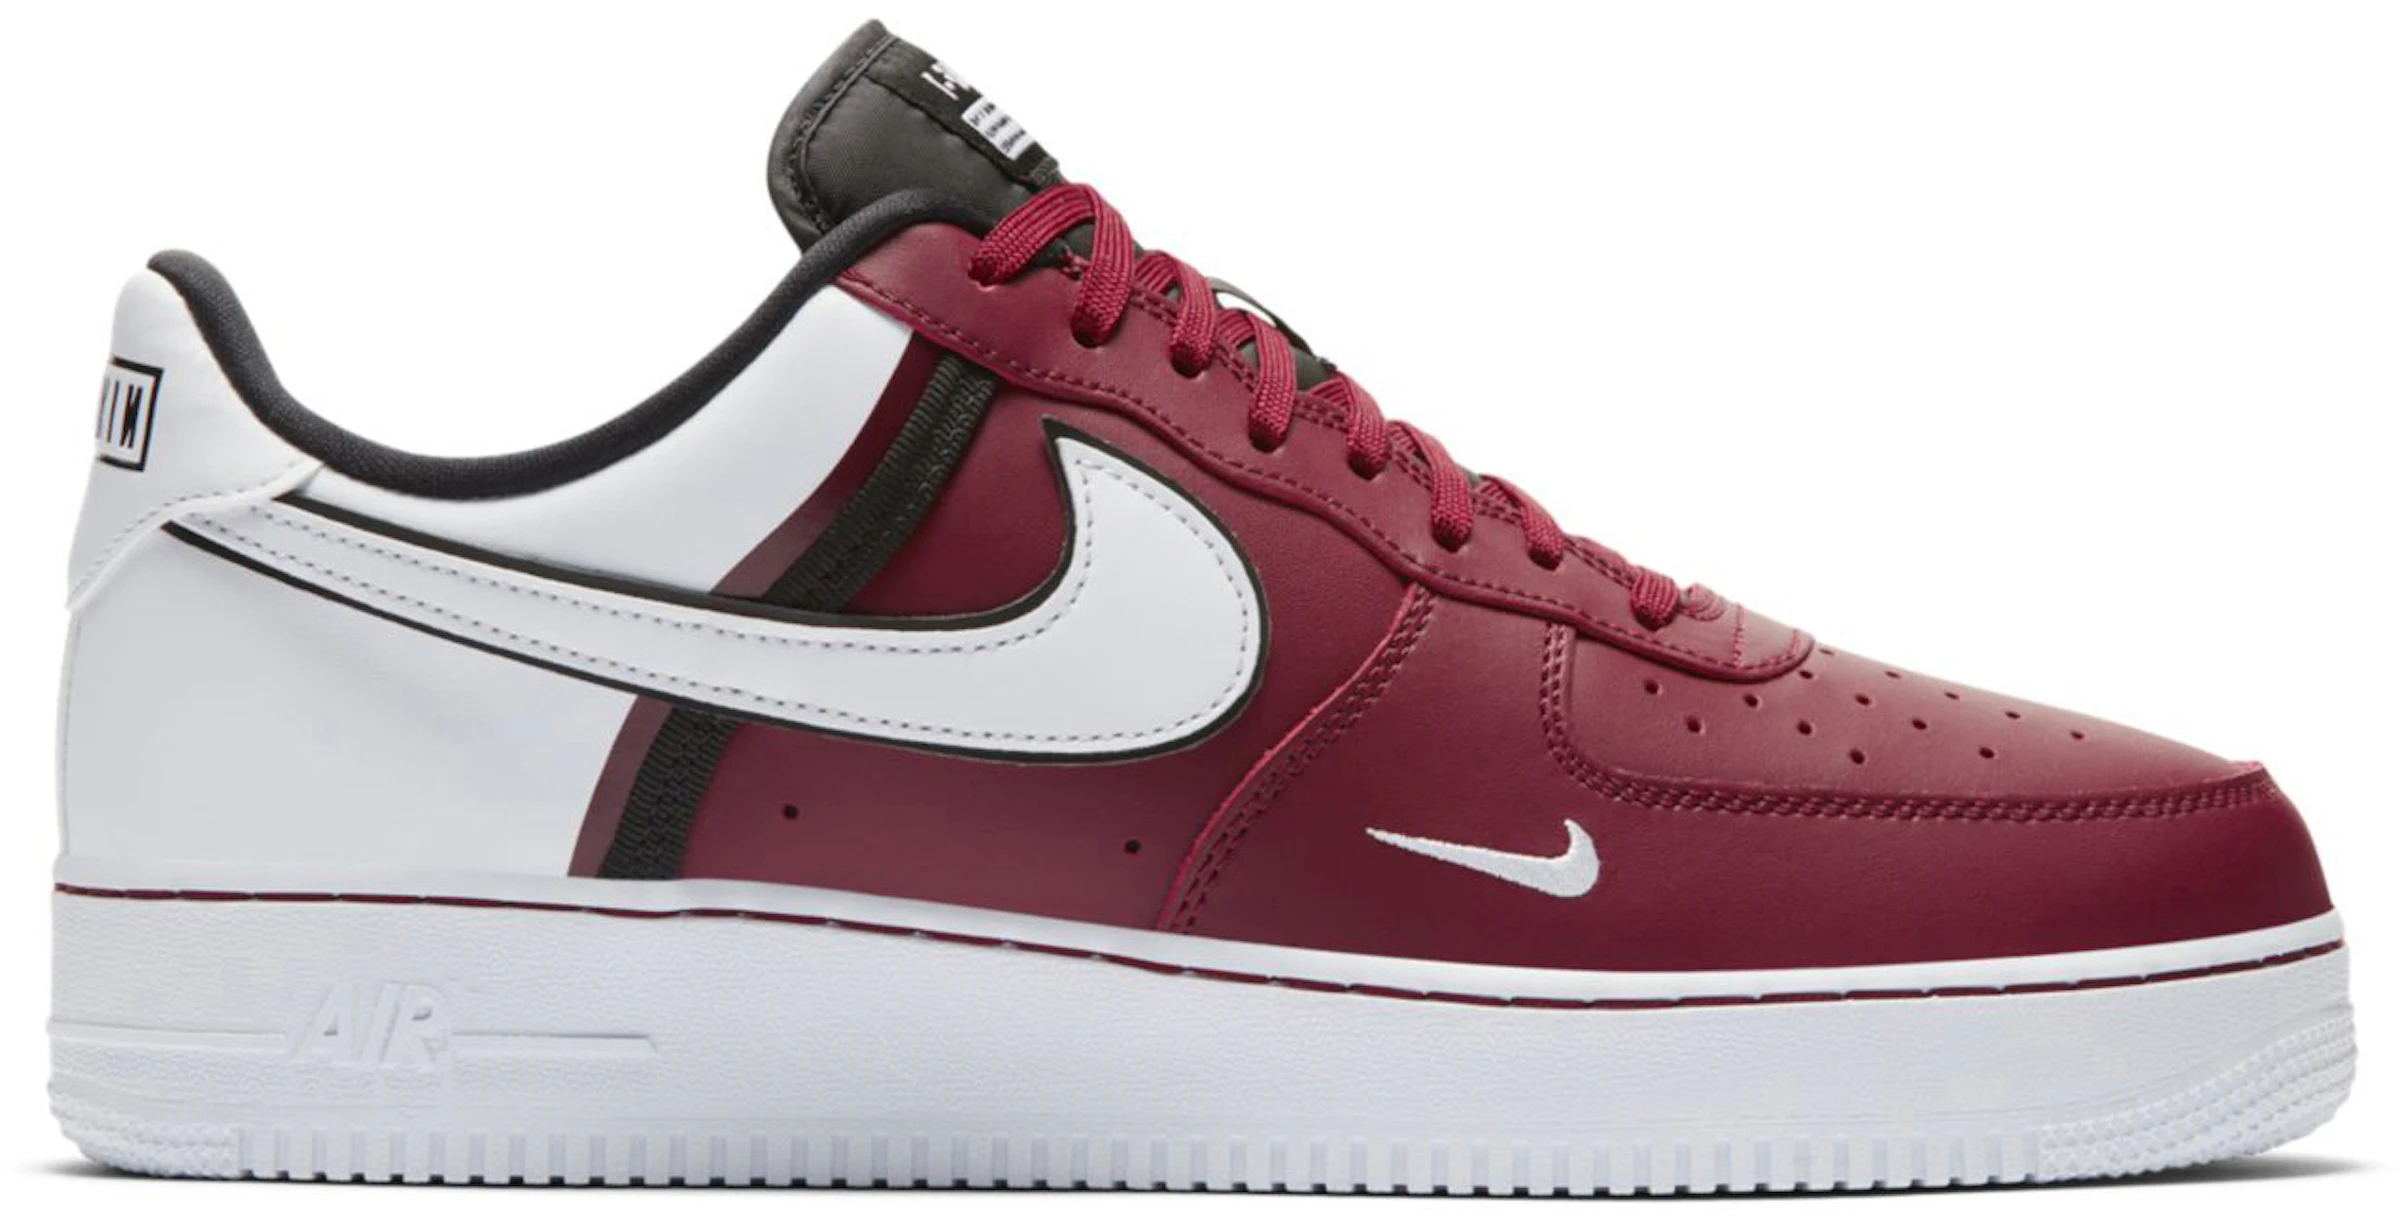 Nike Air Force 1 Low 07 Lv8 Red Black - Ci0061-600 - Us